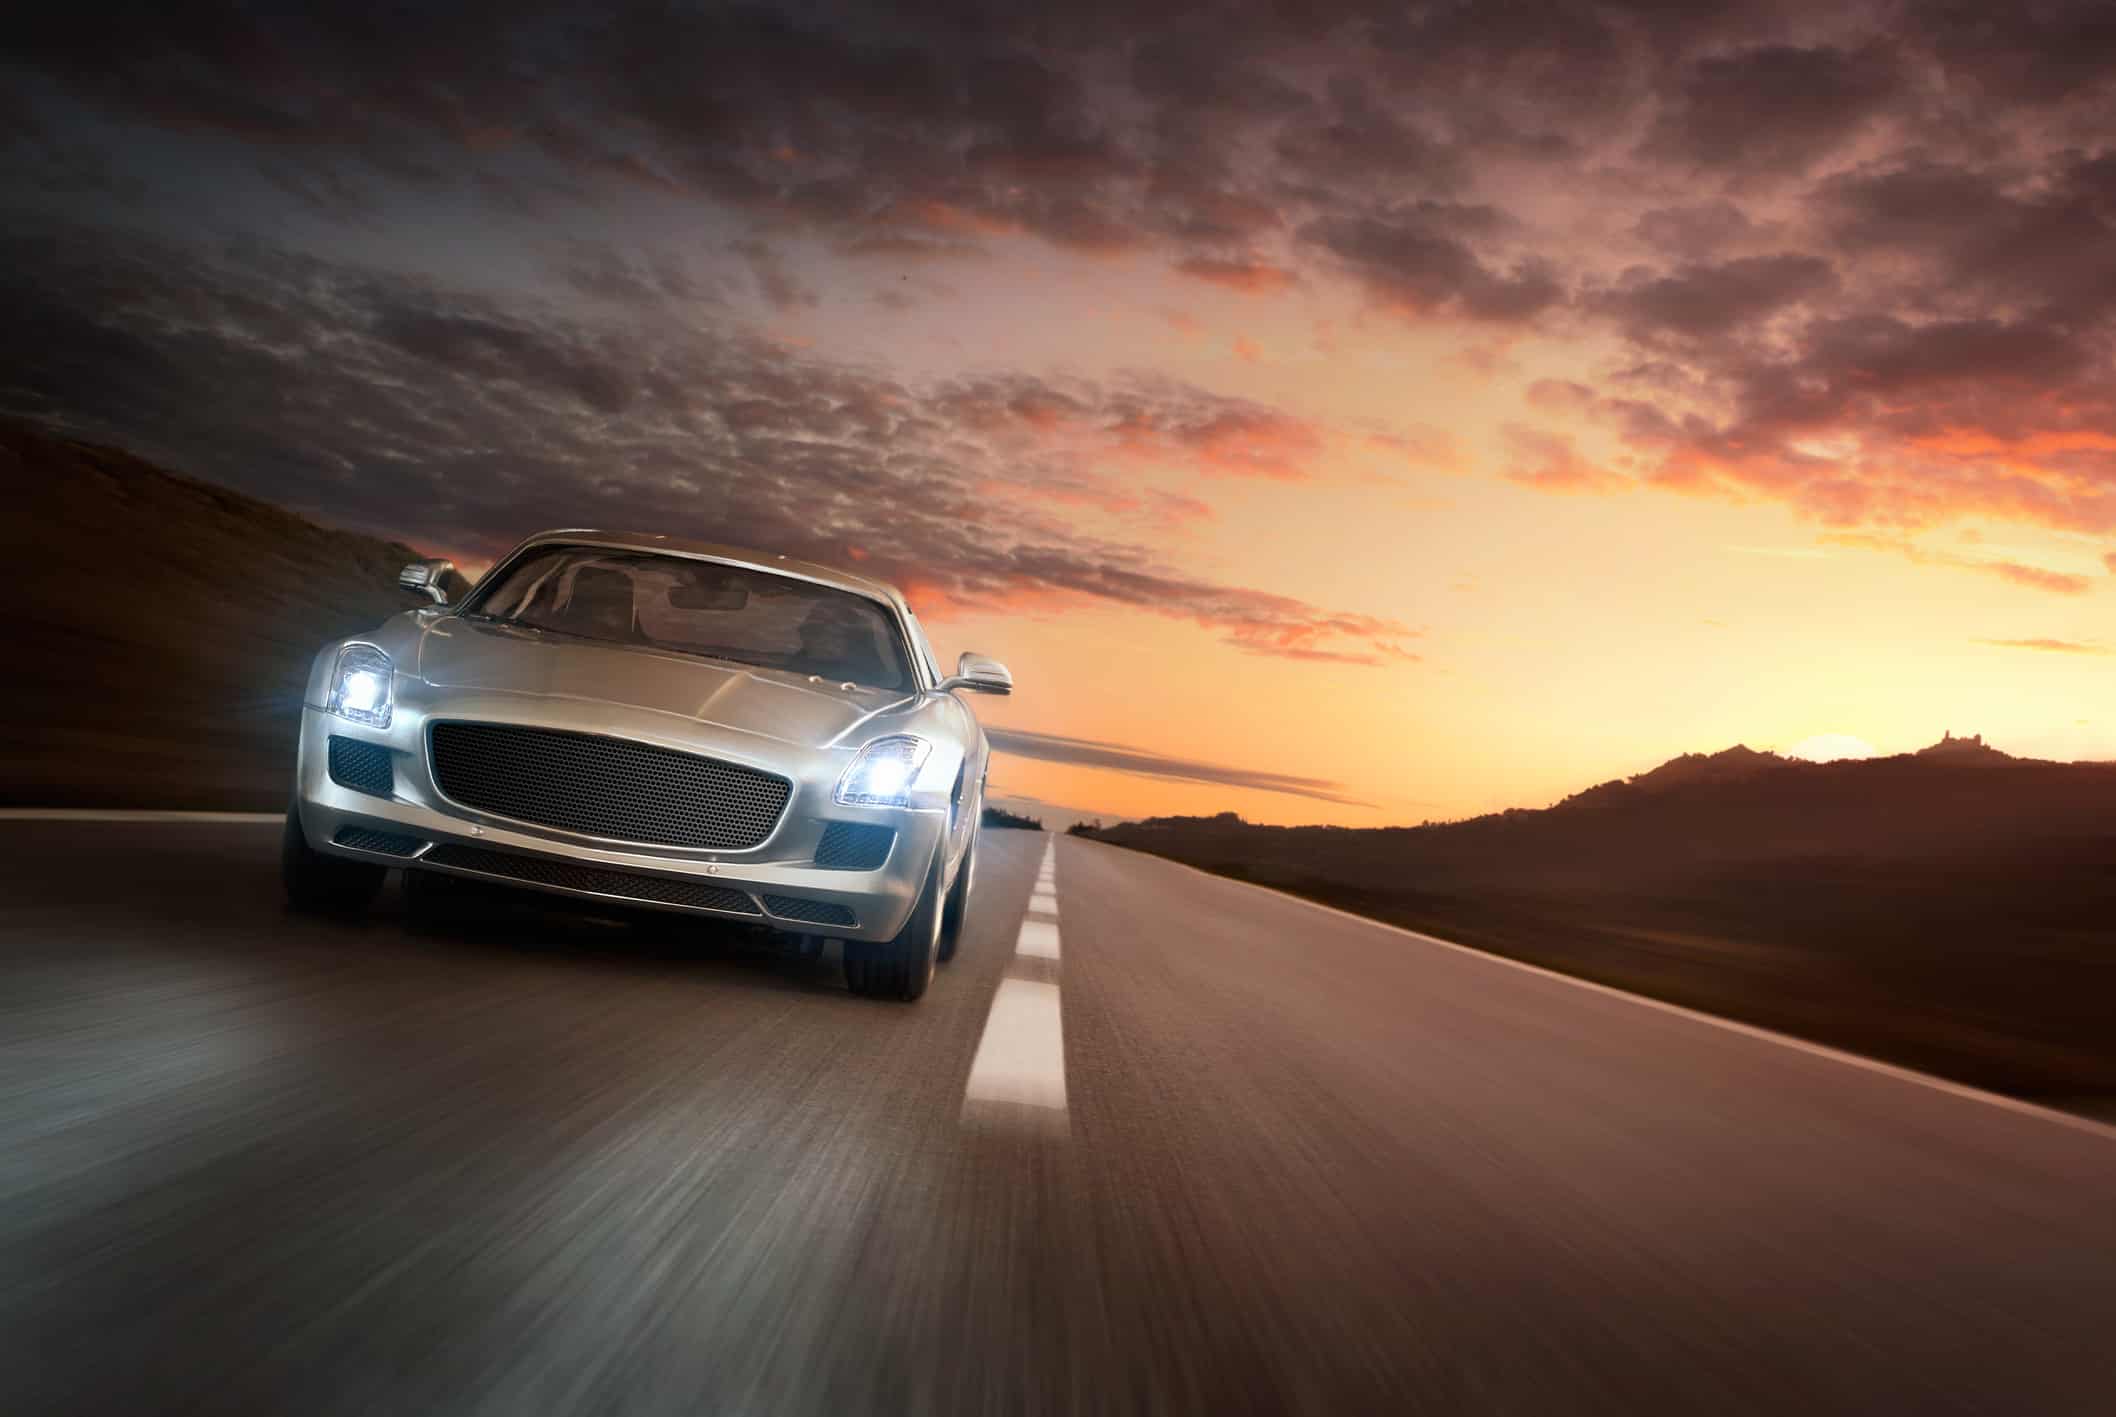 Luxury sports car at the sunset - automotive industry